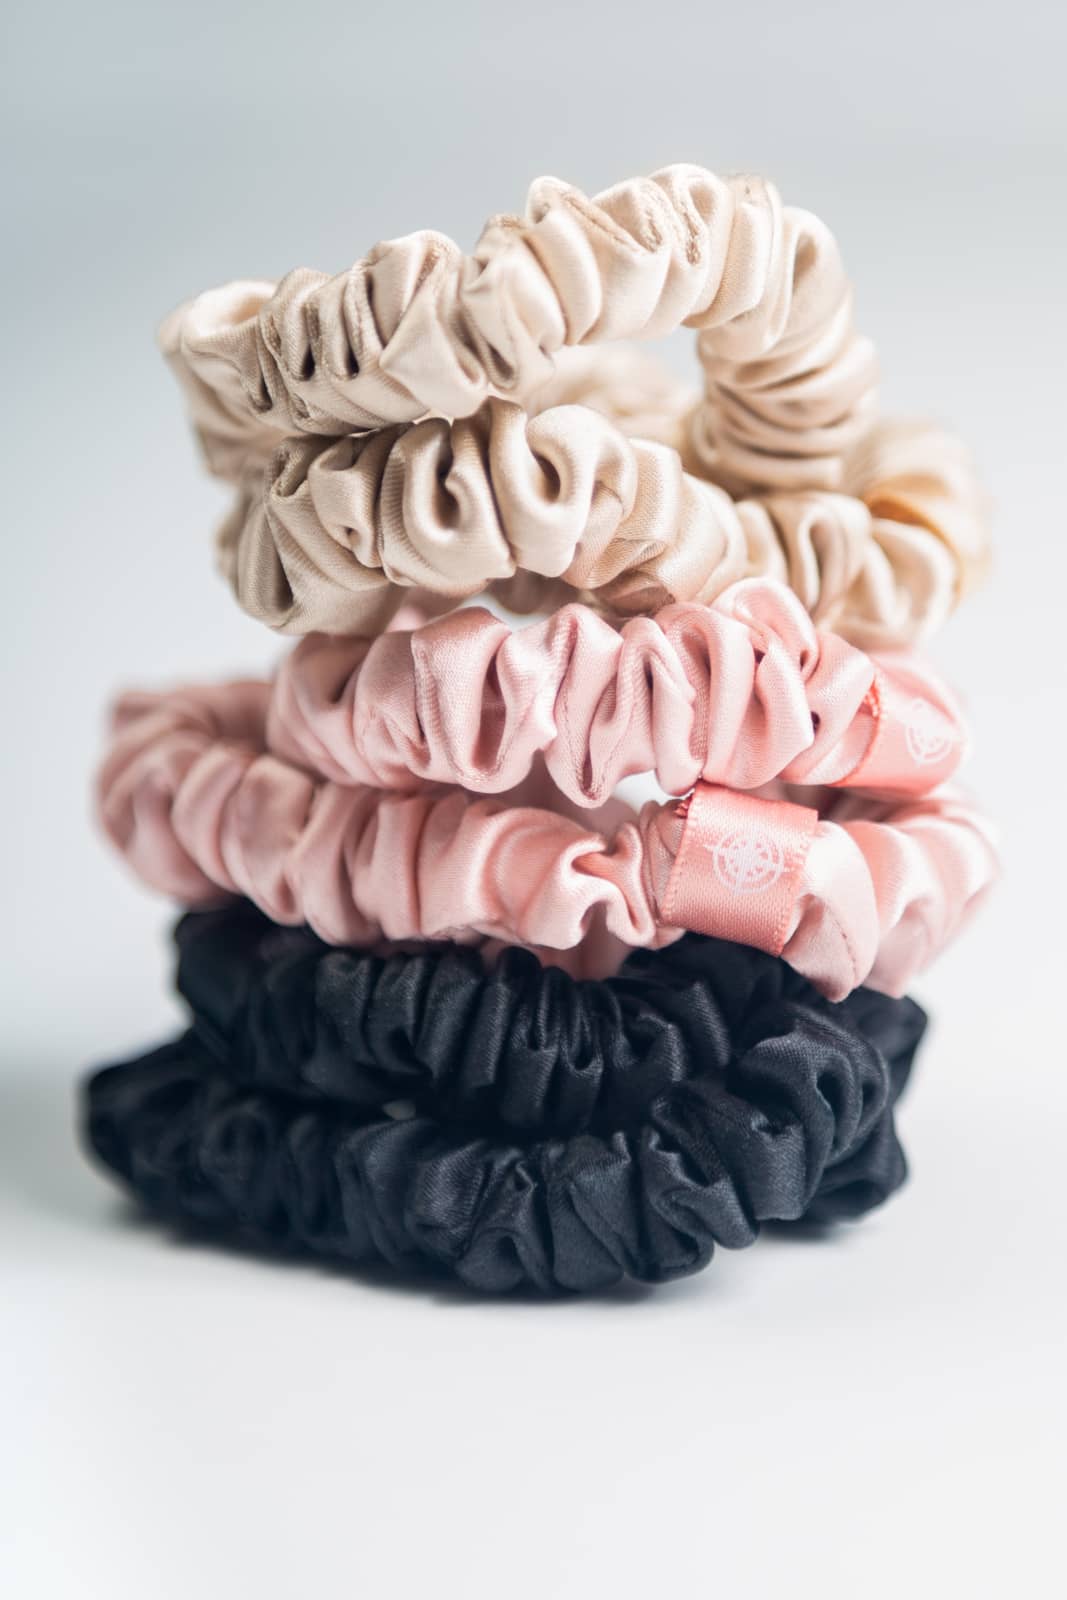 100% Pure Mulberry Silk Hair Scrunchies - Set of 6 Skinny Hair Ties Womens>Beauty>Hair Care Fishers Finery 